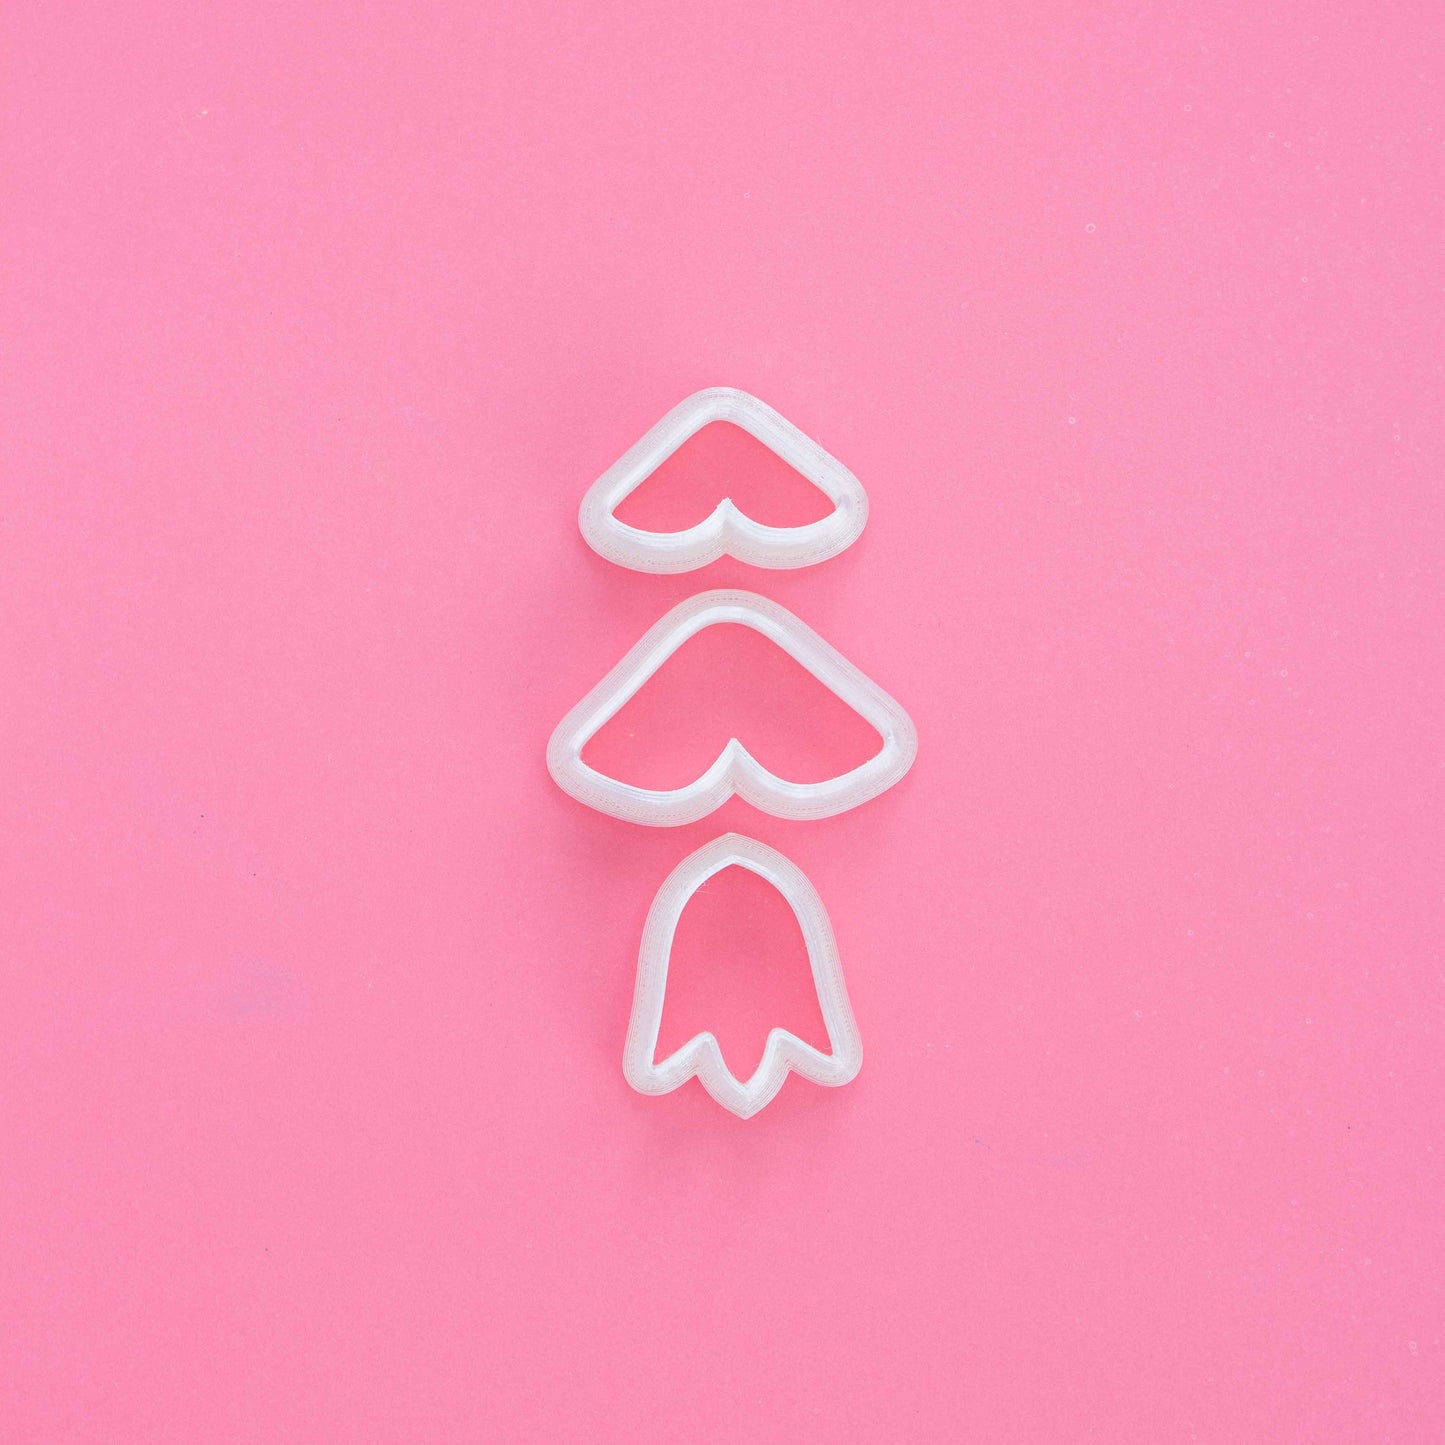 3 tulip shape clay cutters on a pink background